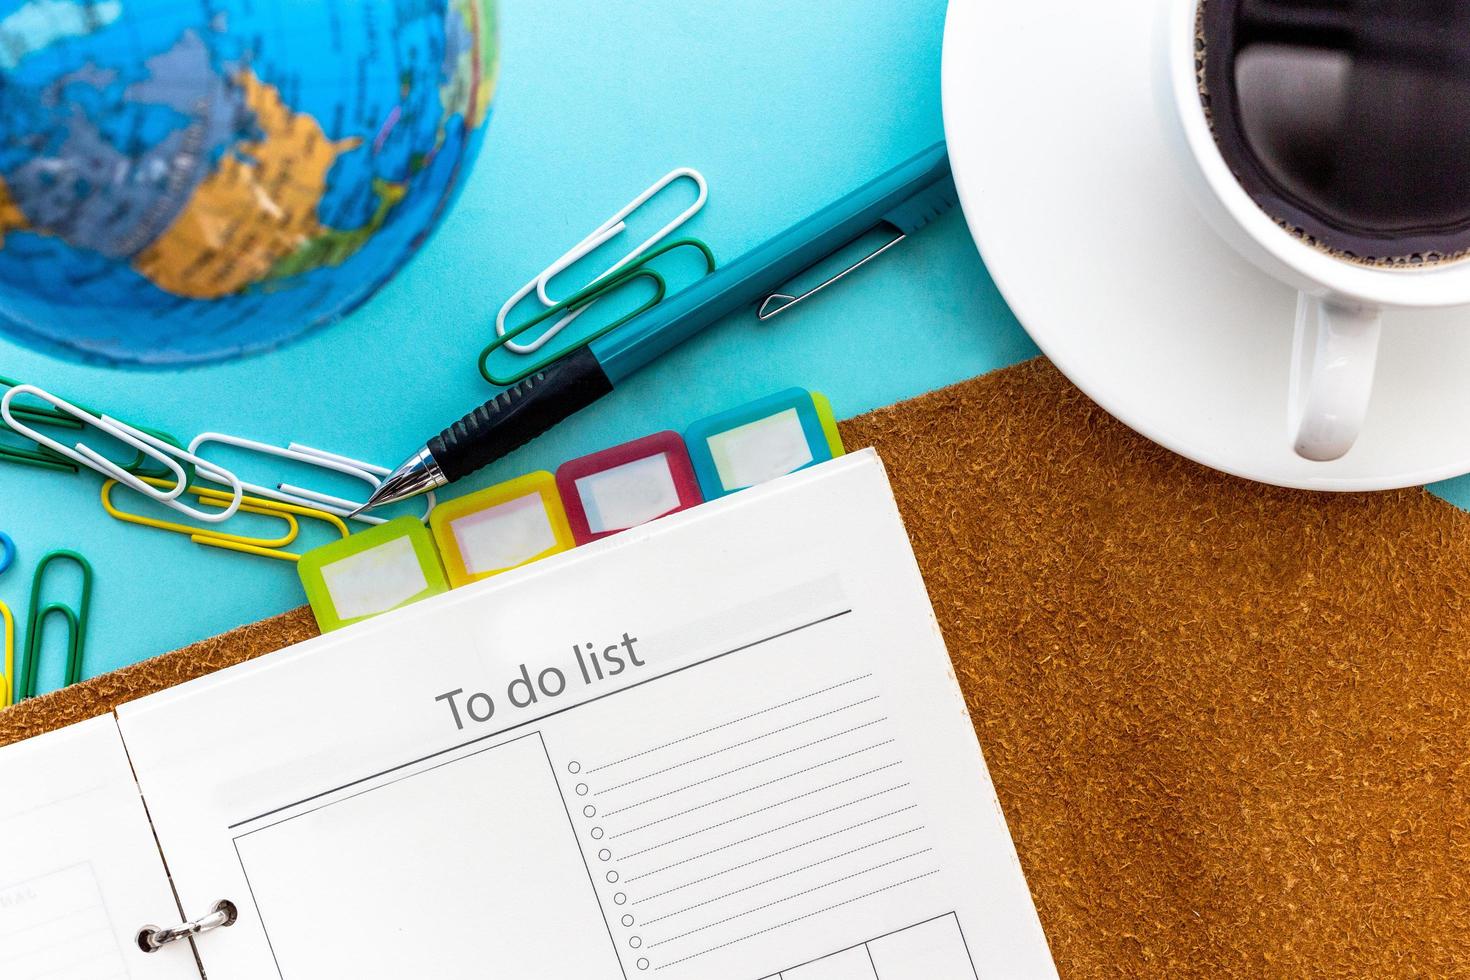 To do list or check list setting page concept on planner with mechanical pencil and black coffee on blue background in top view photo